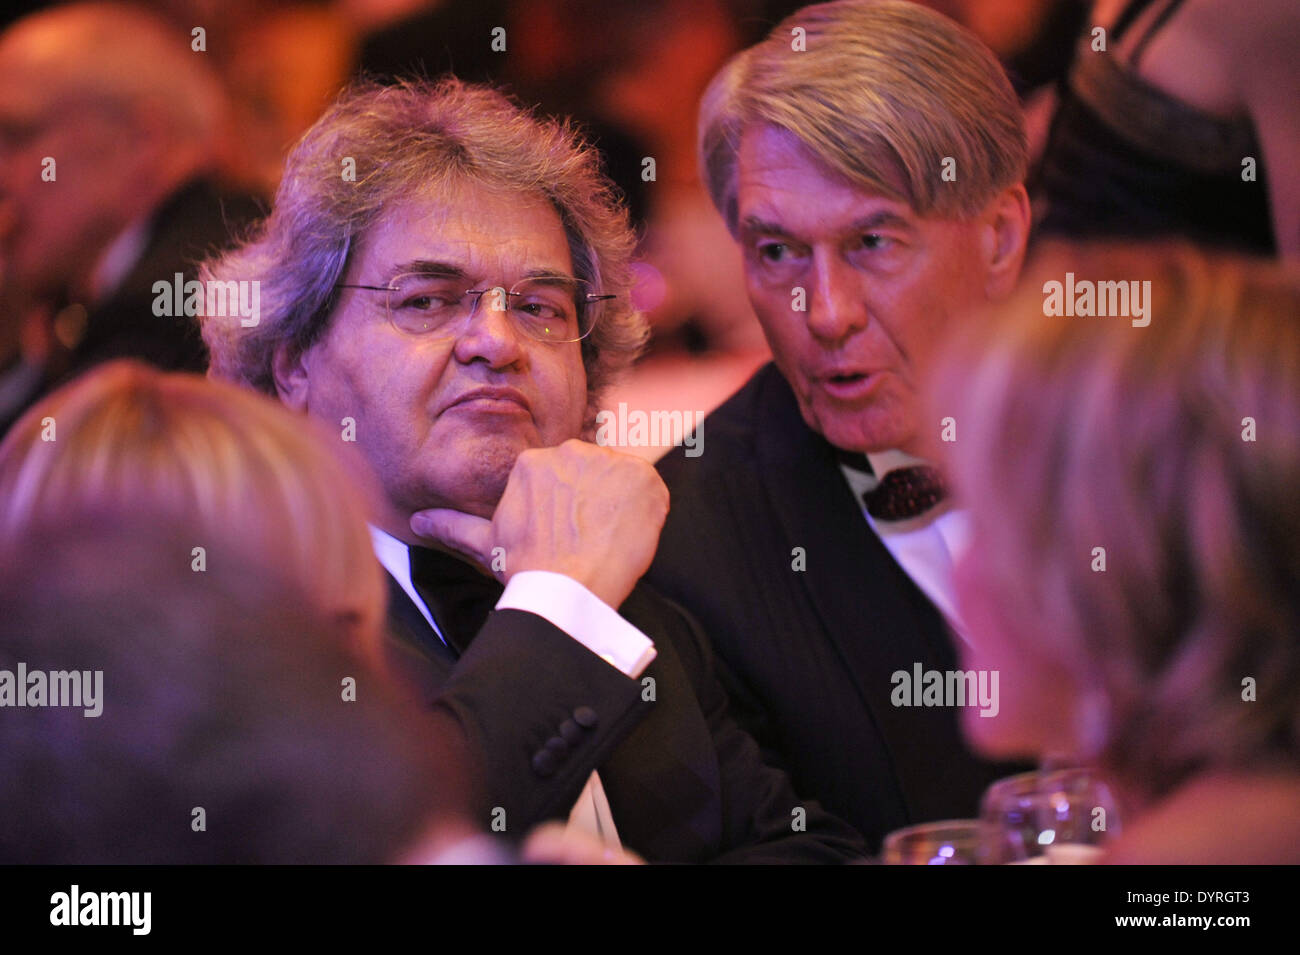 Helmut Markwort and Wolf-Dieter Ring at the 38th German Film Ball in Munich, 2011 Stock Photo